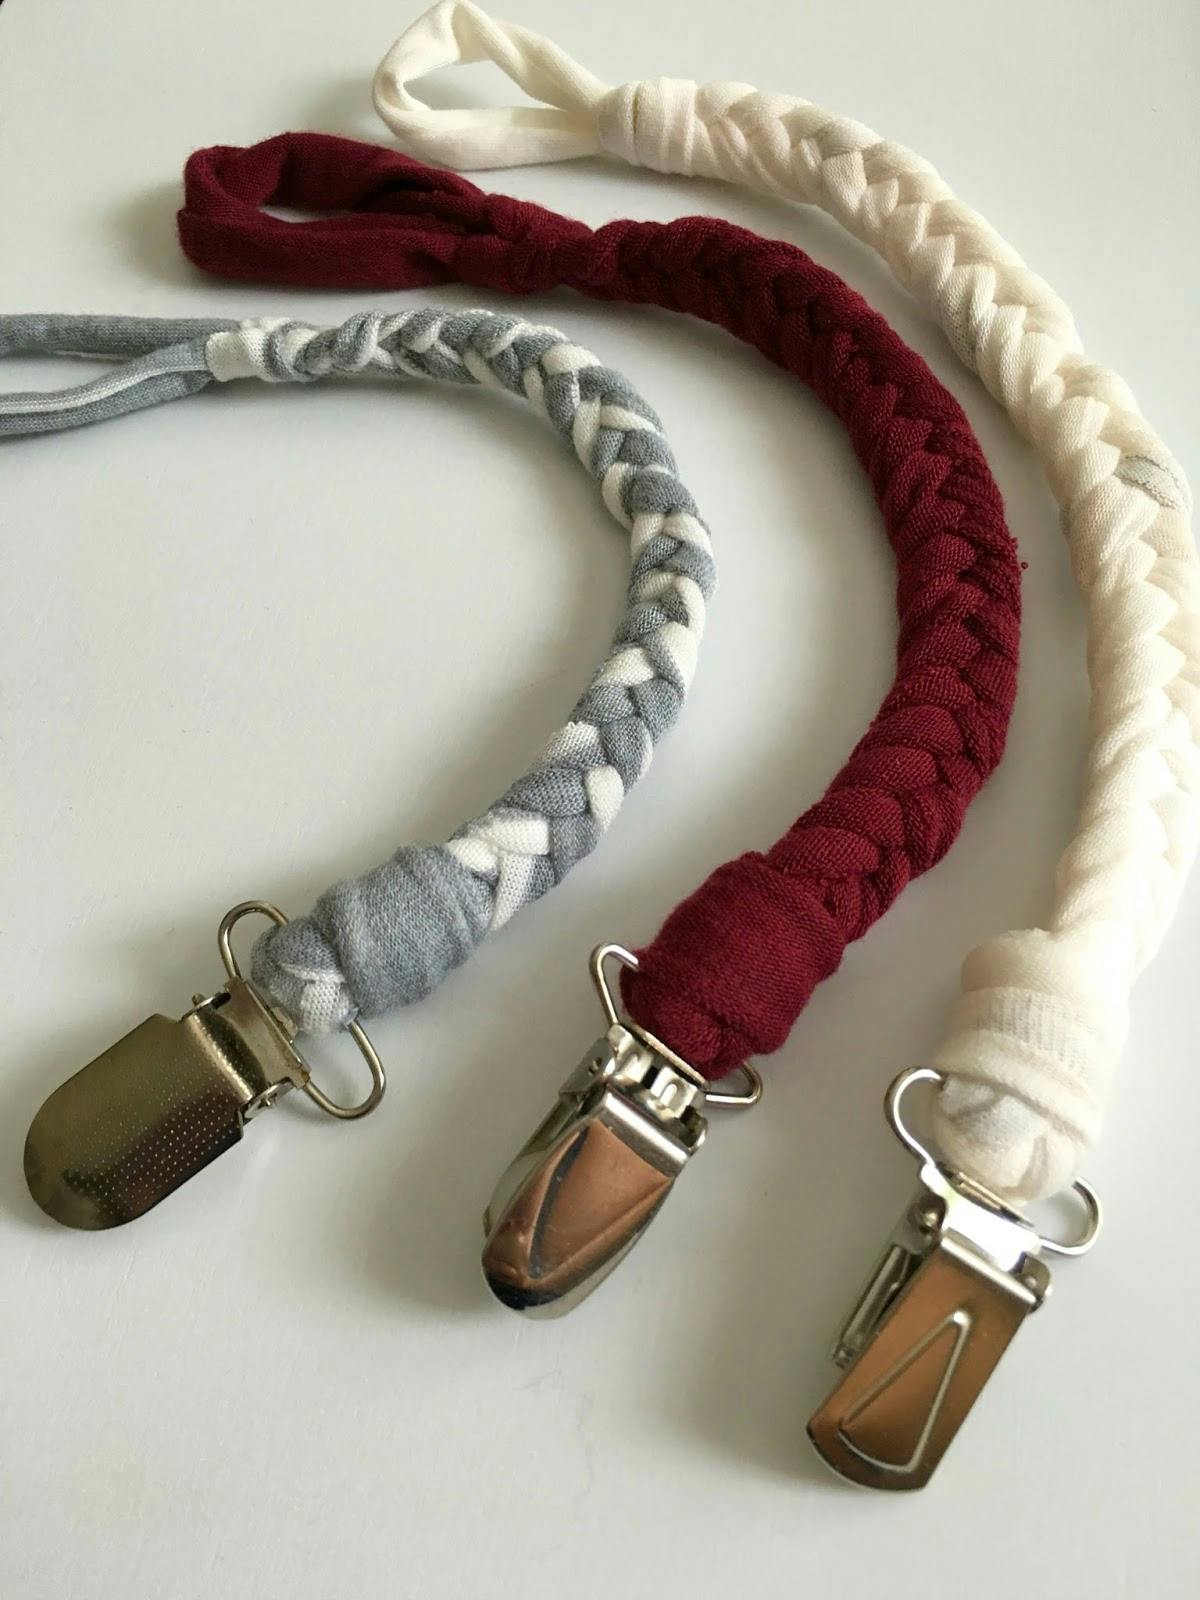 Braid a pacifier clip with old t-shirts so you don't lose binkies and save $10 each.